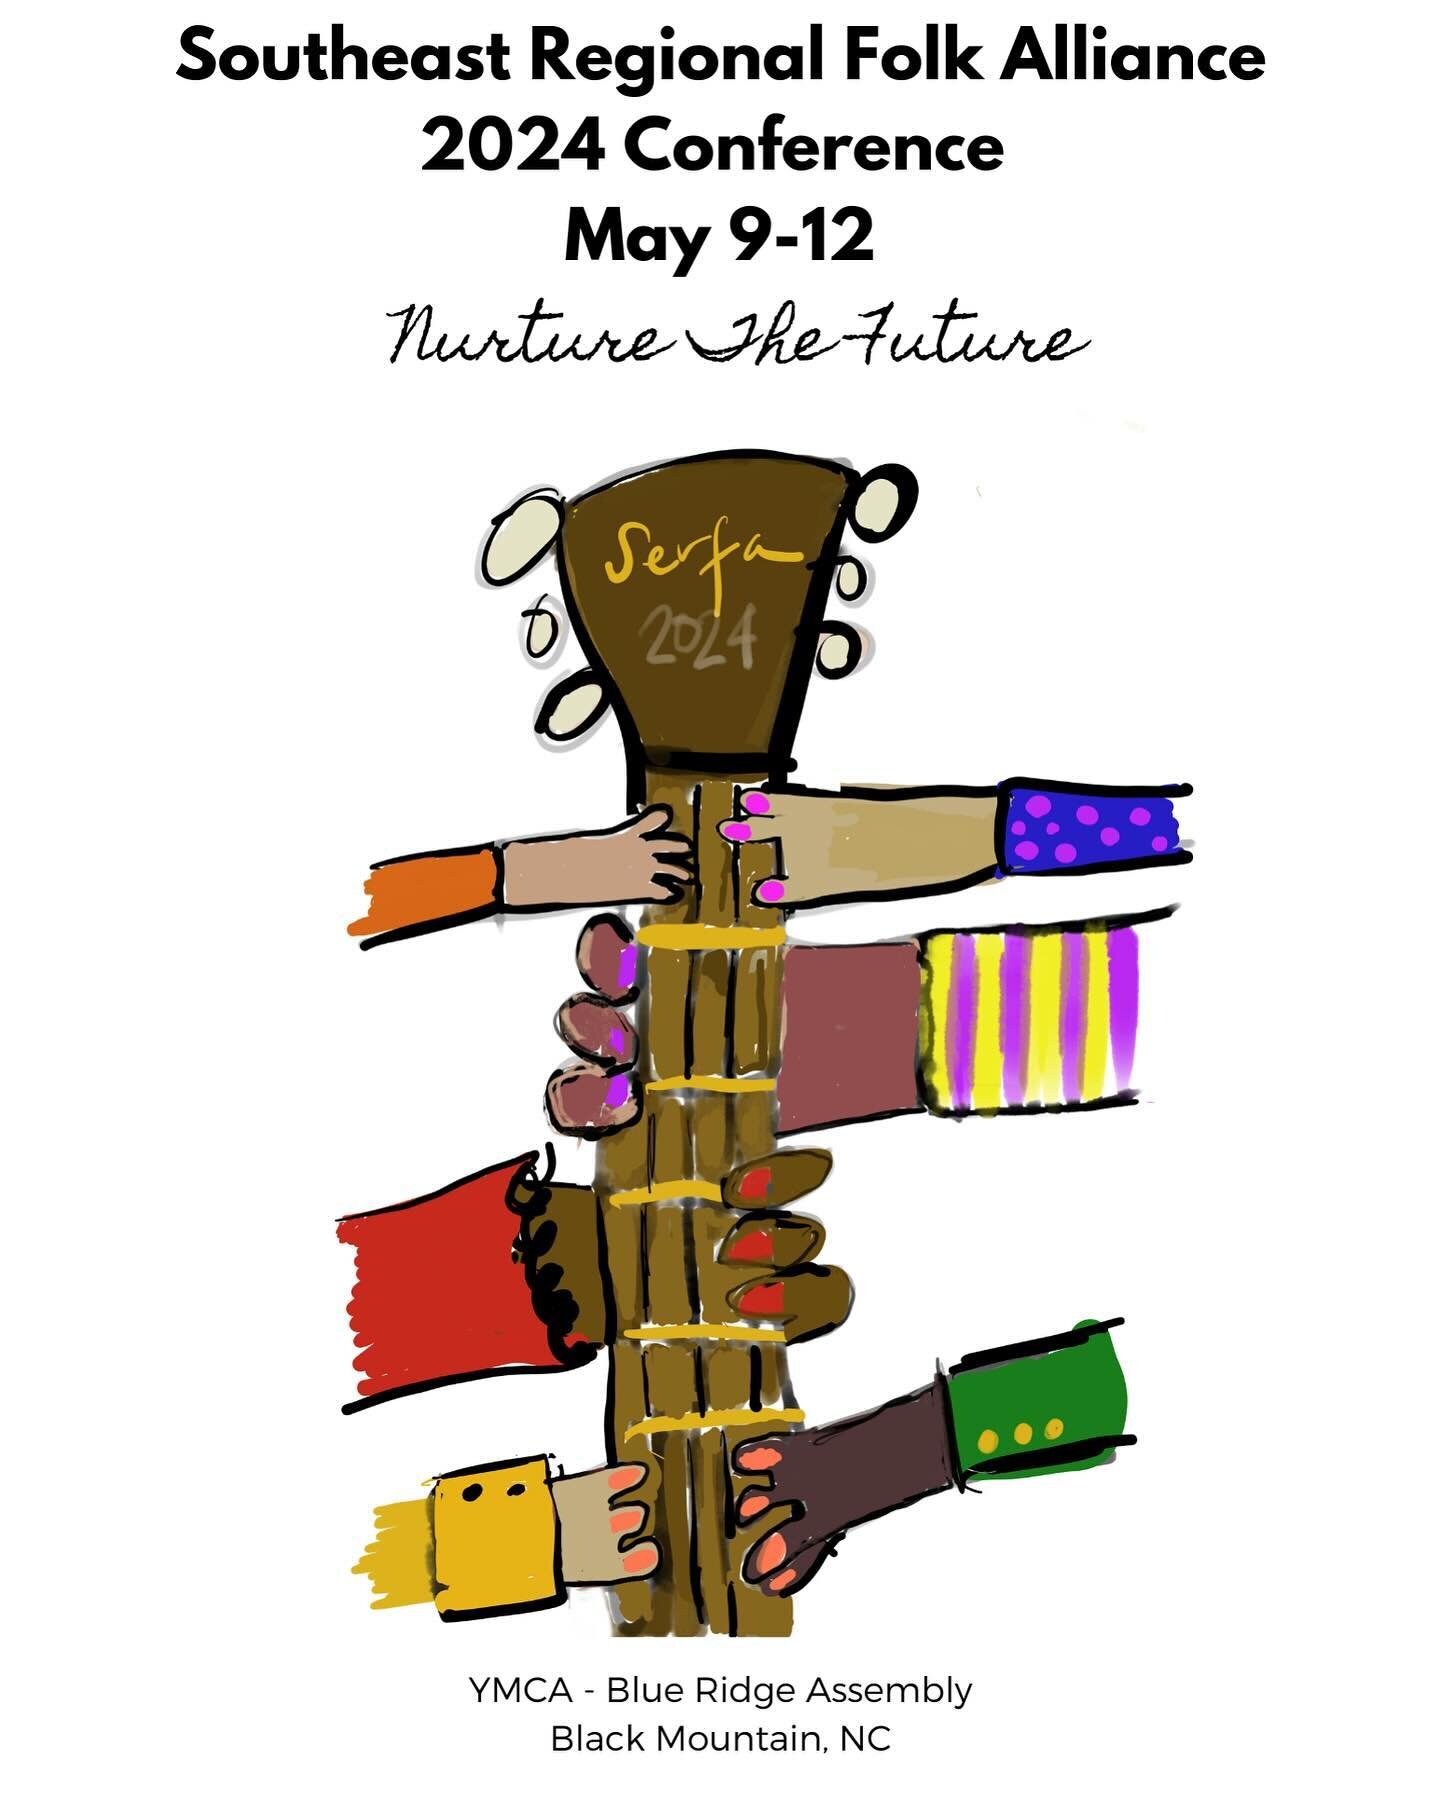 Happy March - we are staring at the two-month - marker for our Spring conference in May. Take a look at the website with an updated message from the board. Here is the program cover for our conference. #folkmusic #southeast #blueridgeparkway #musicco